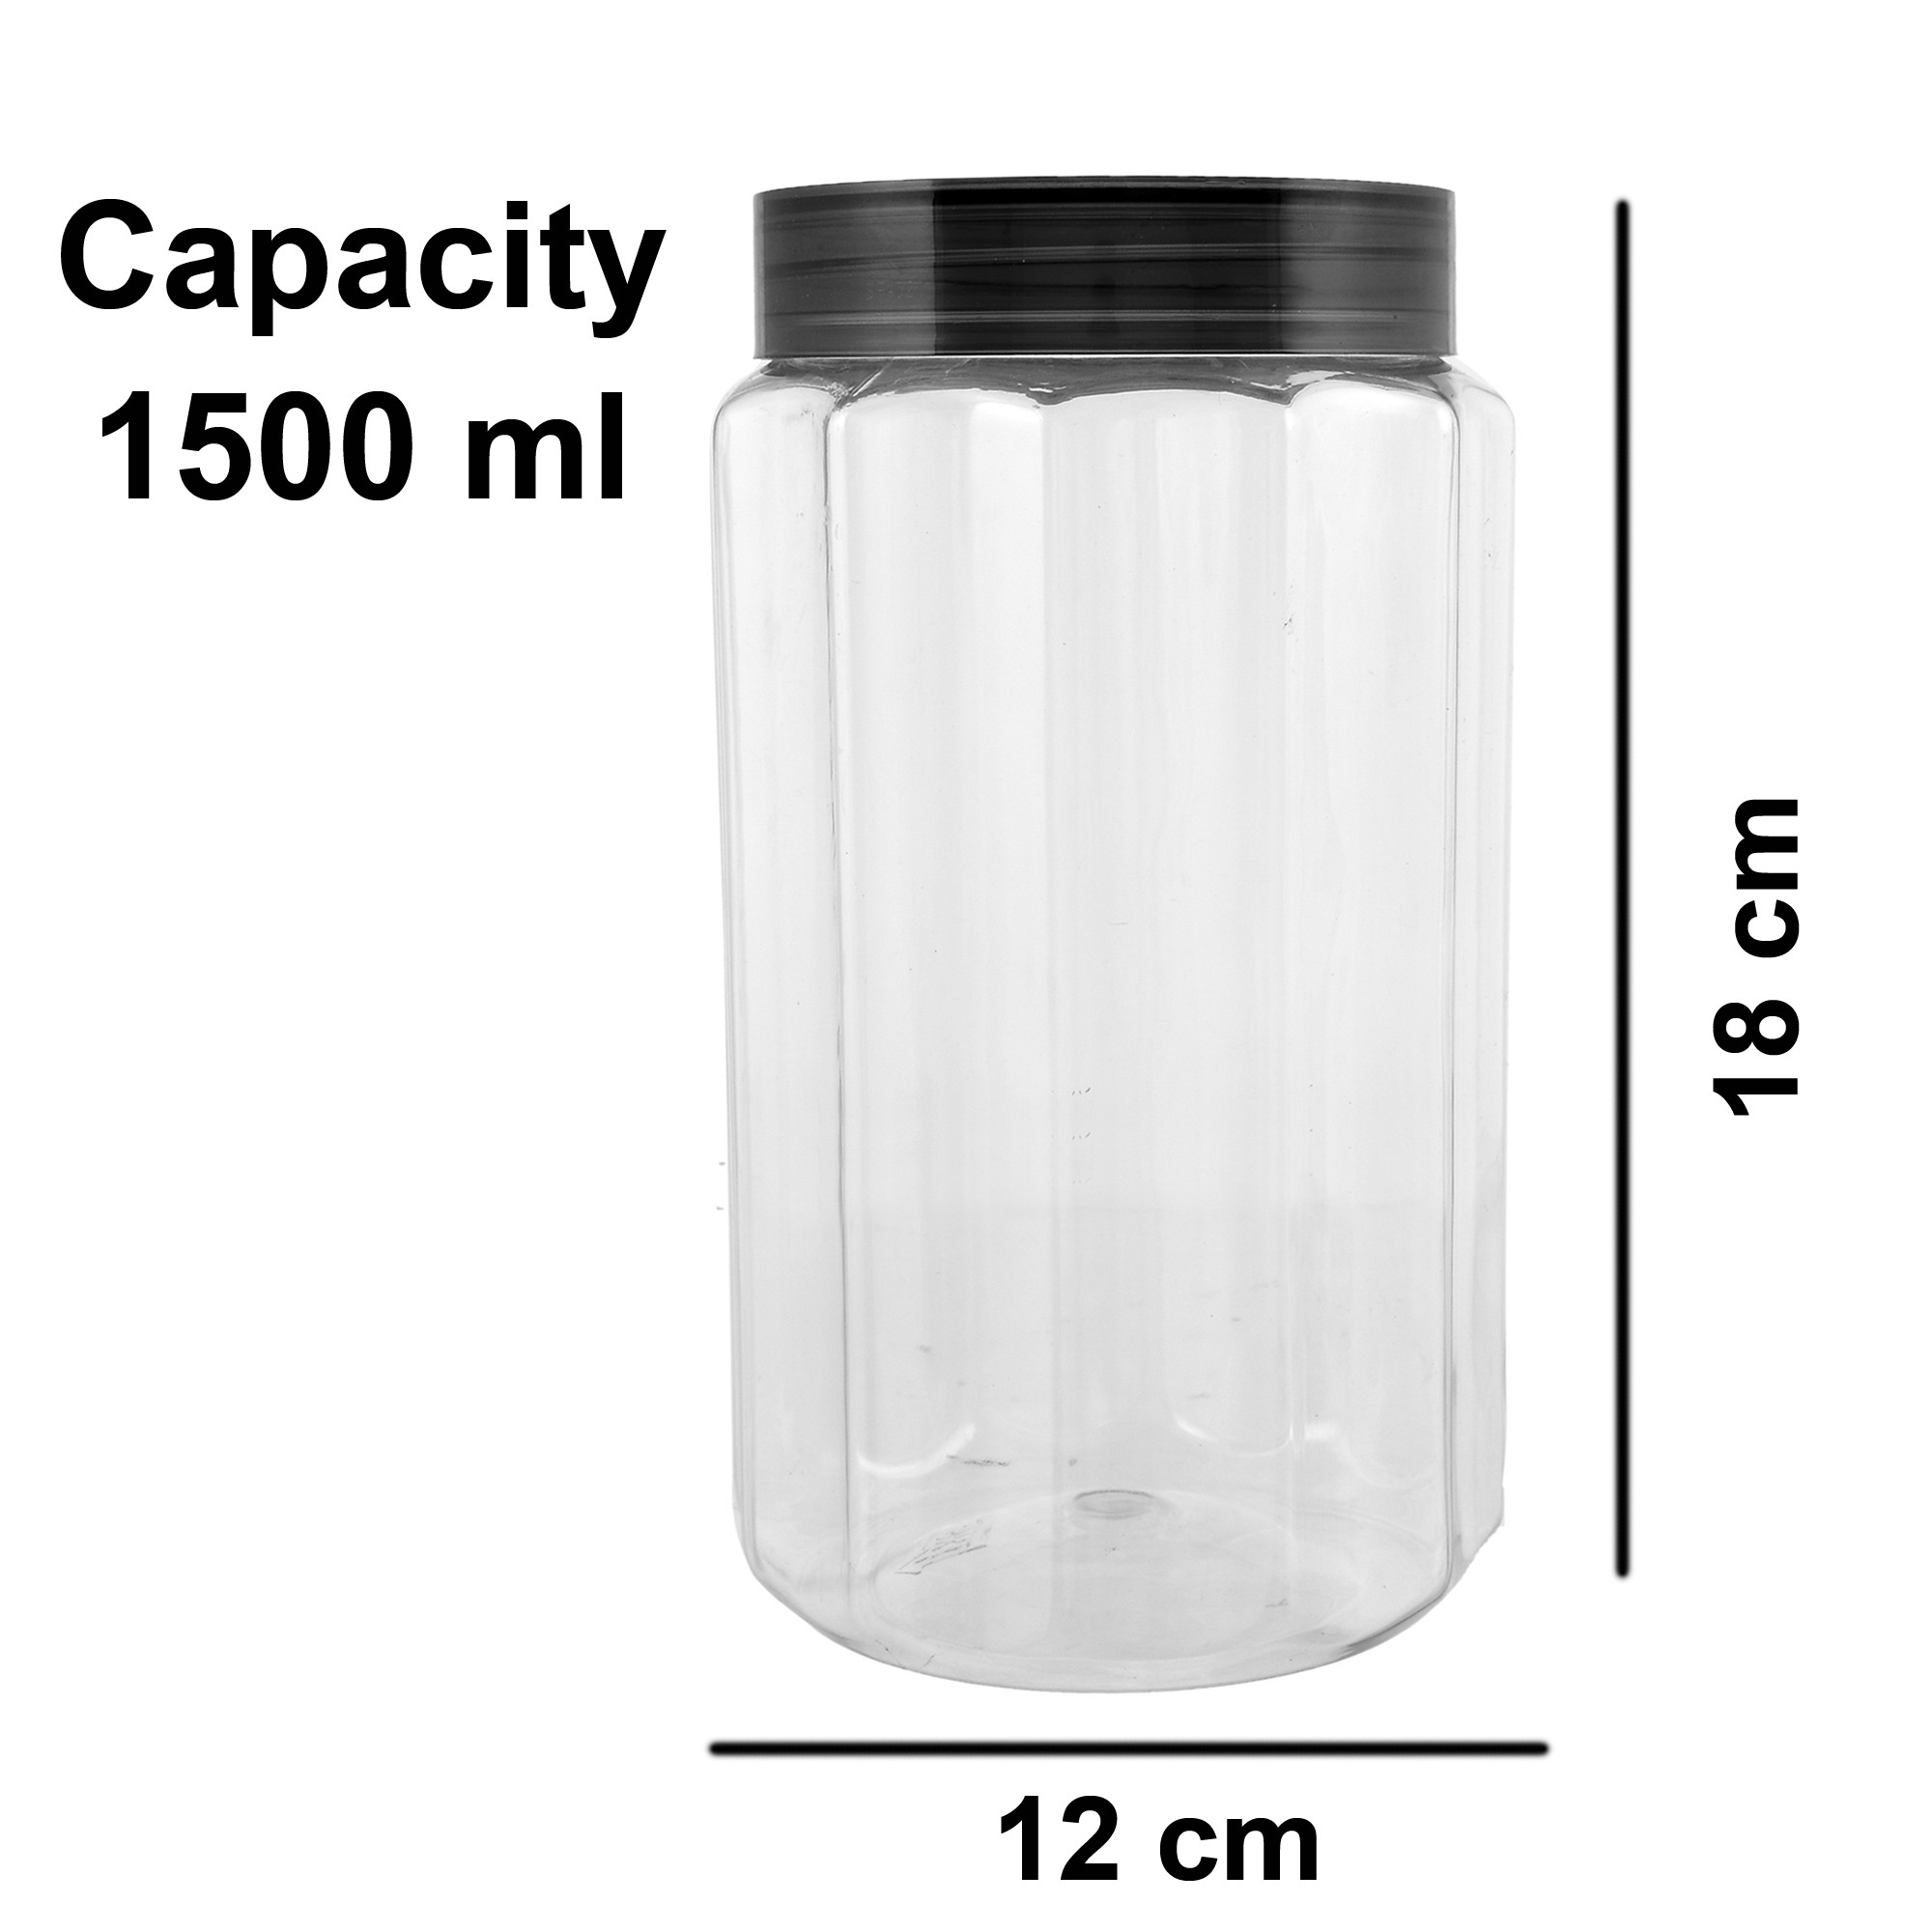 Kuber Industries Opal Airtight Food Storage Containers Kitchen Containers for Storage Set Plastic Storage Box for Kitchen Airtight Containers Storage Jar Set for Kitchen Storage (1500 ml, Grey)